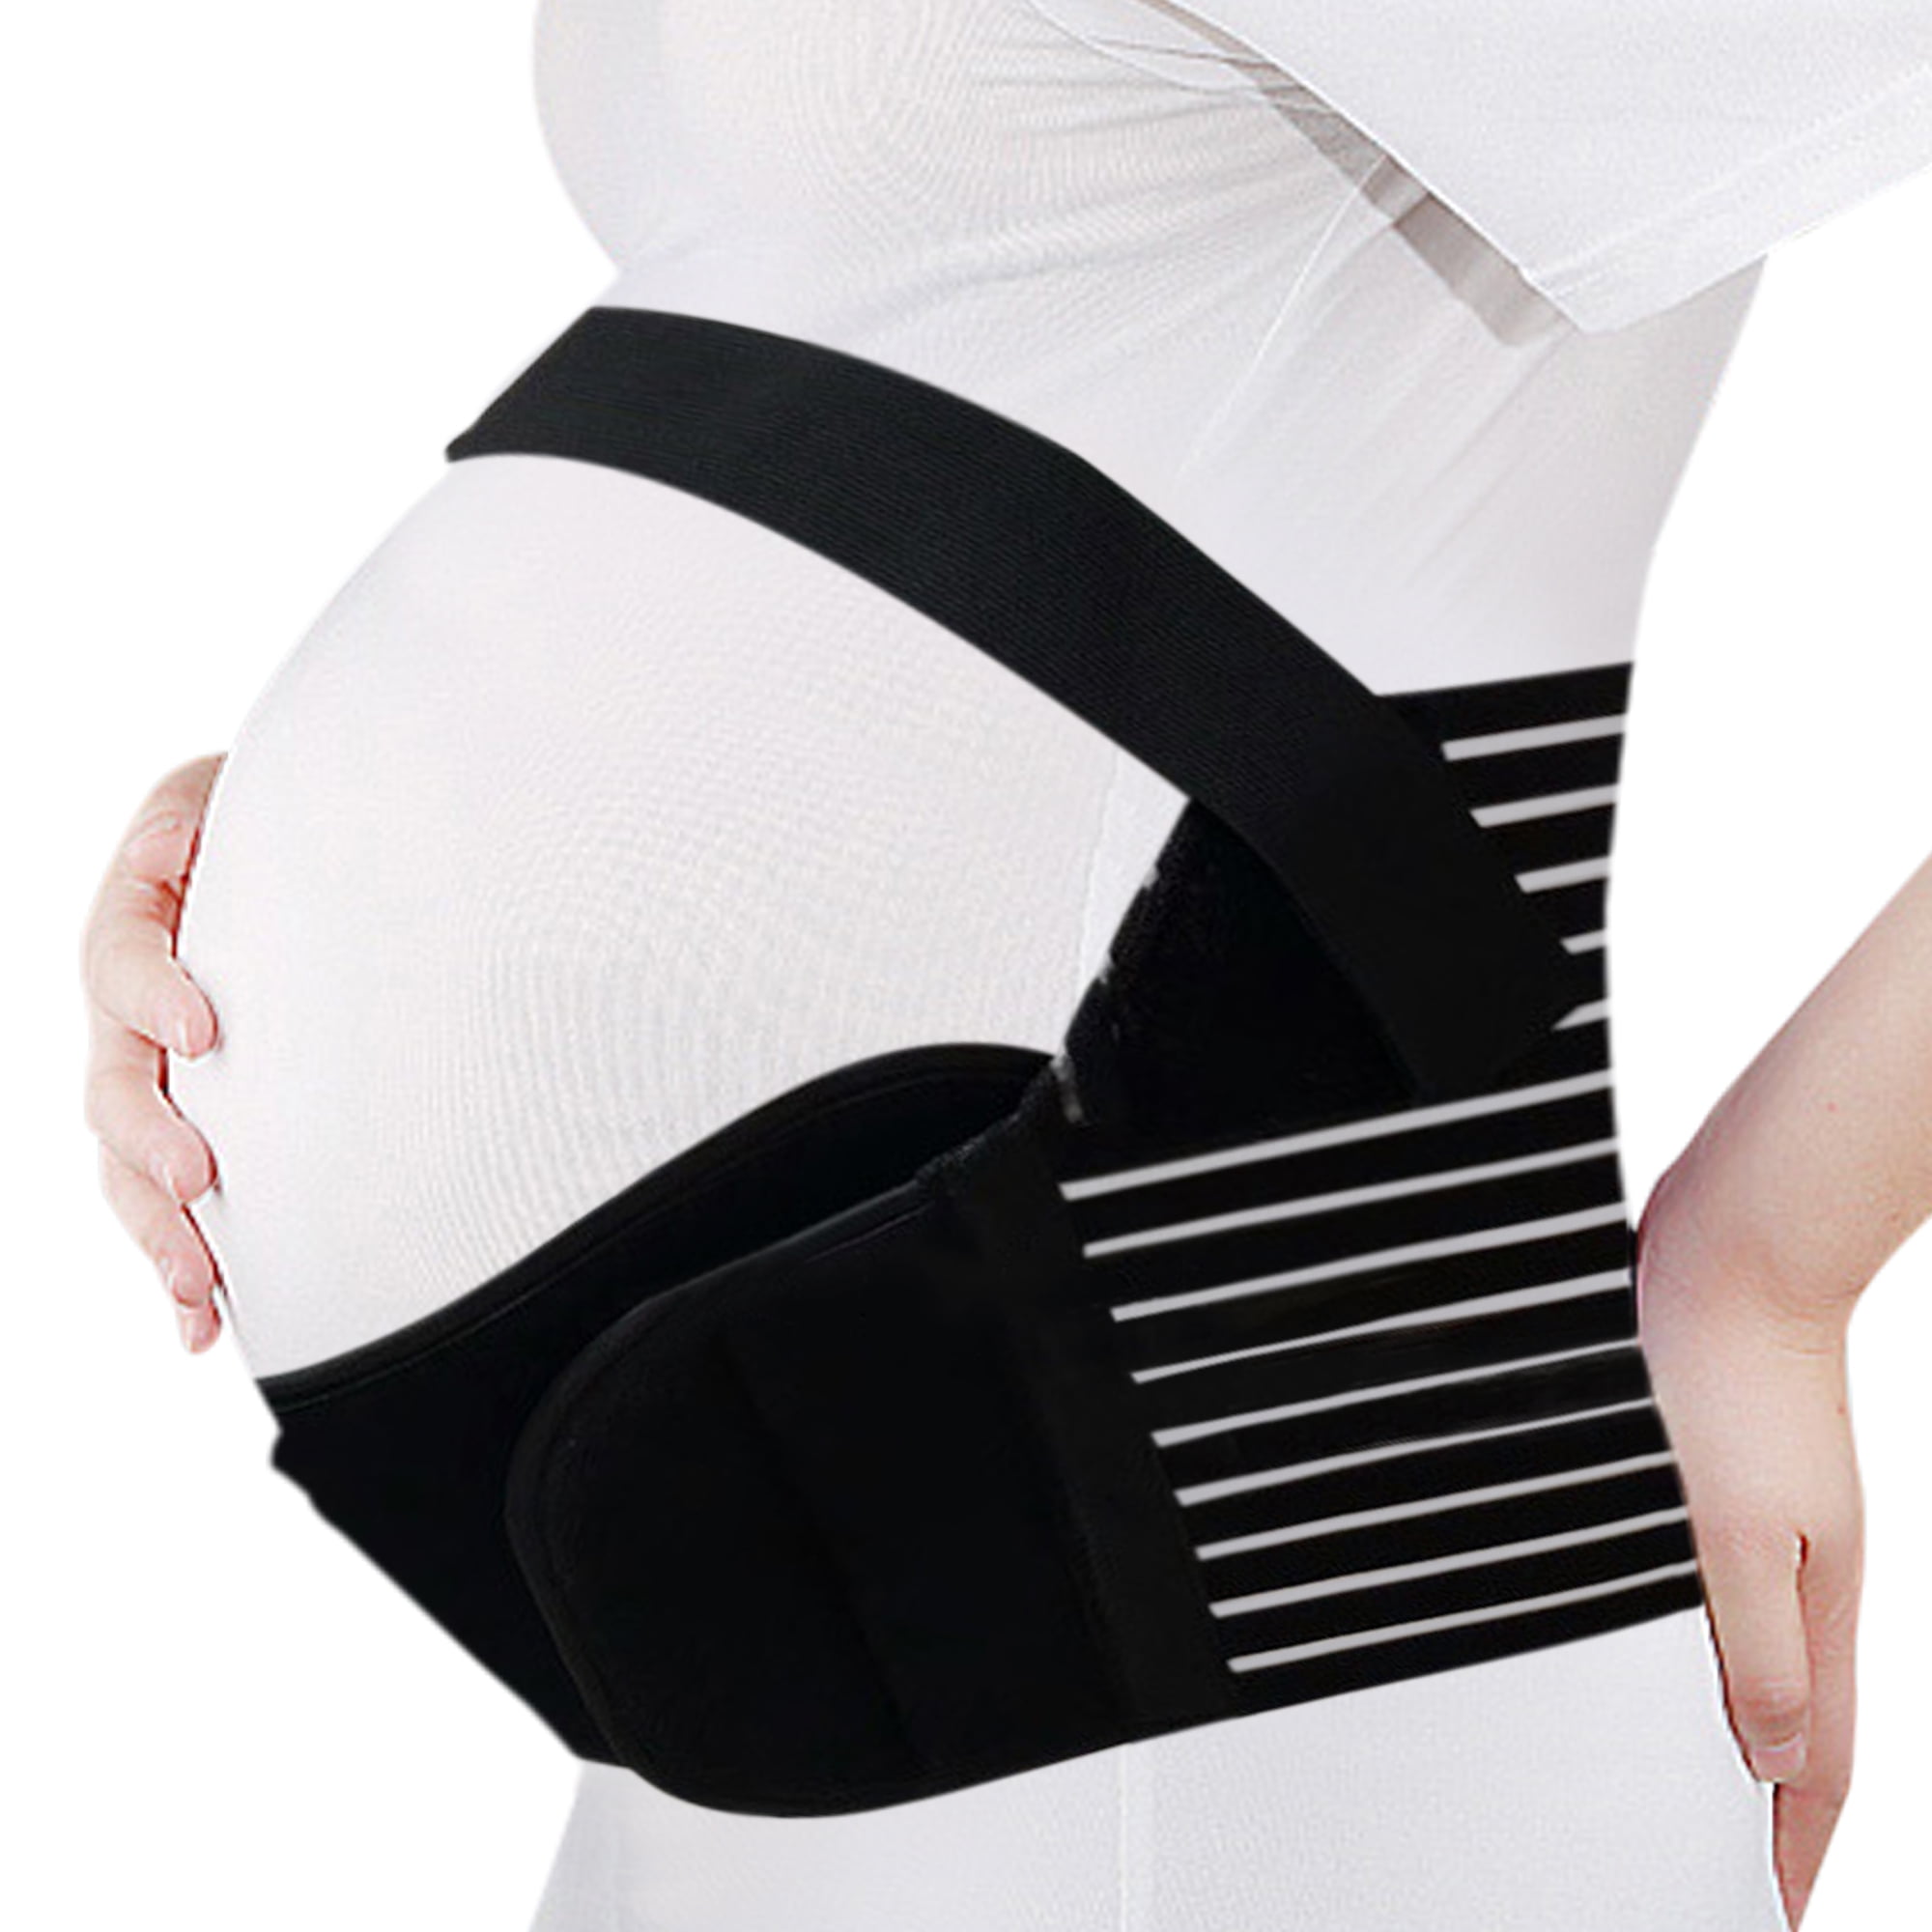 Womens Maternity Belly Support Belt Pregnancy Band Antepartum Abdominal  Back Support 